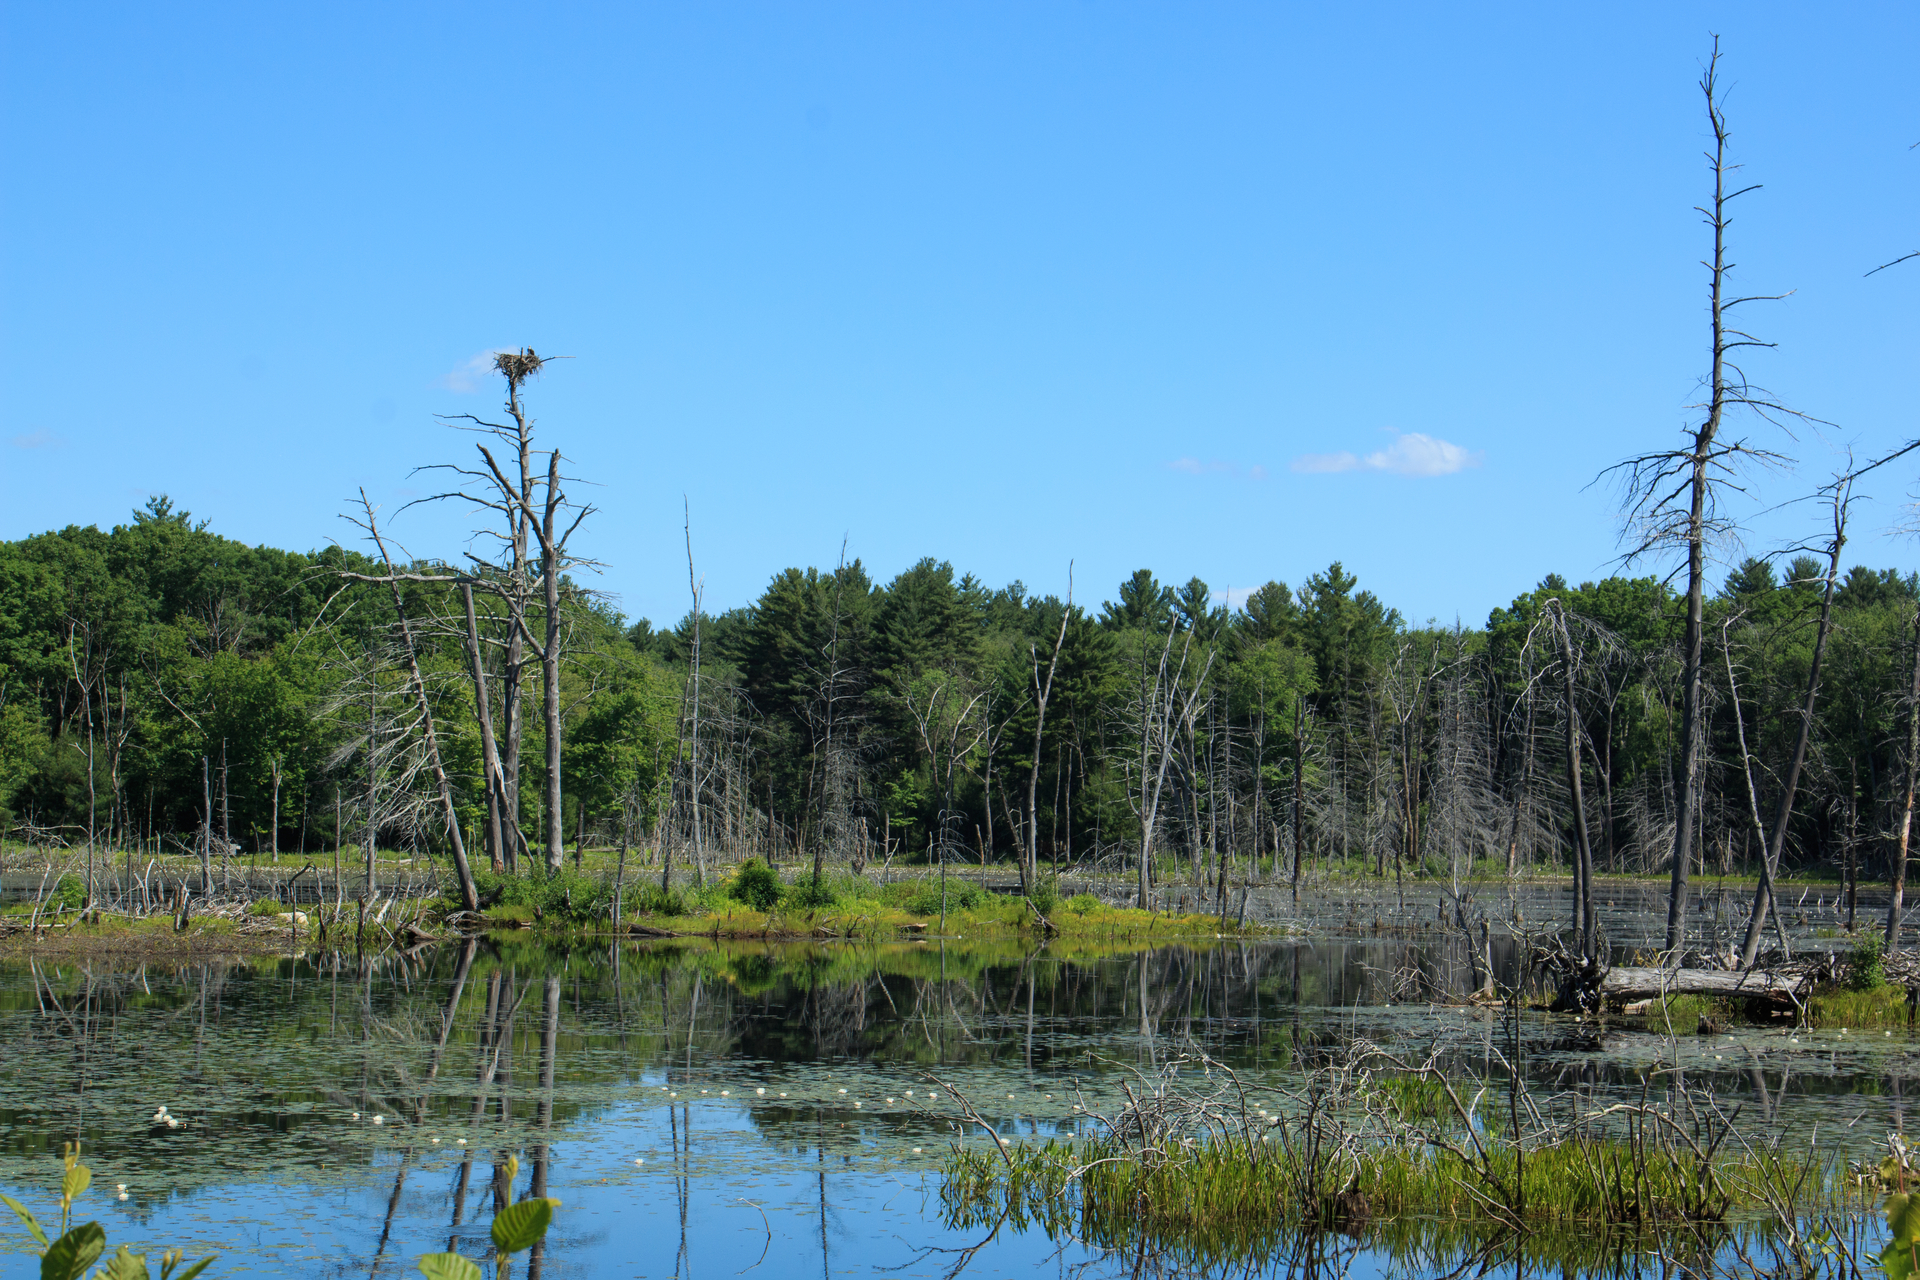 A pond with tall dead trees and green vegetation. A large bird nest is built on one of the dead trees.